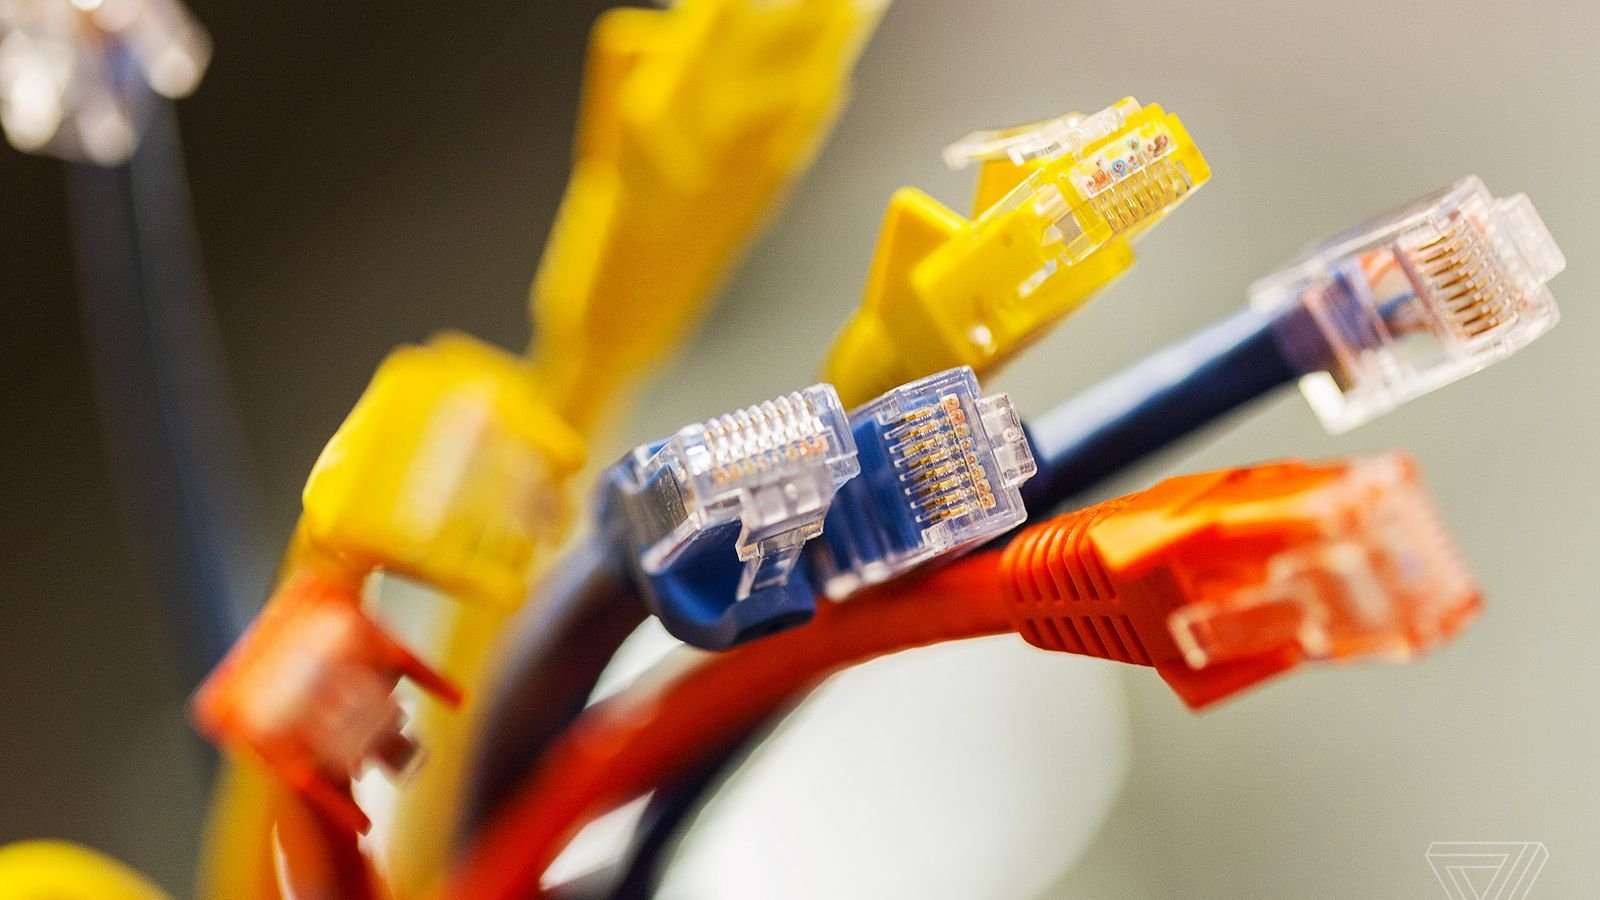 image for Americans support letting cities build their own broadband networks, Pew finds